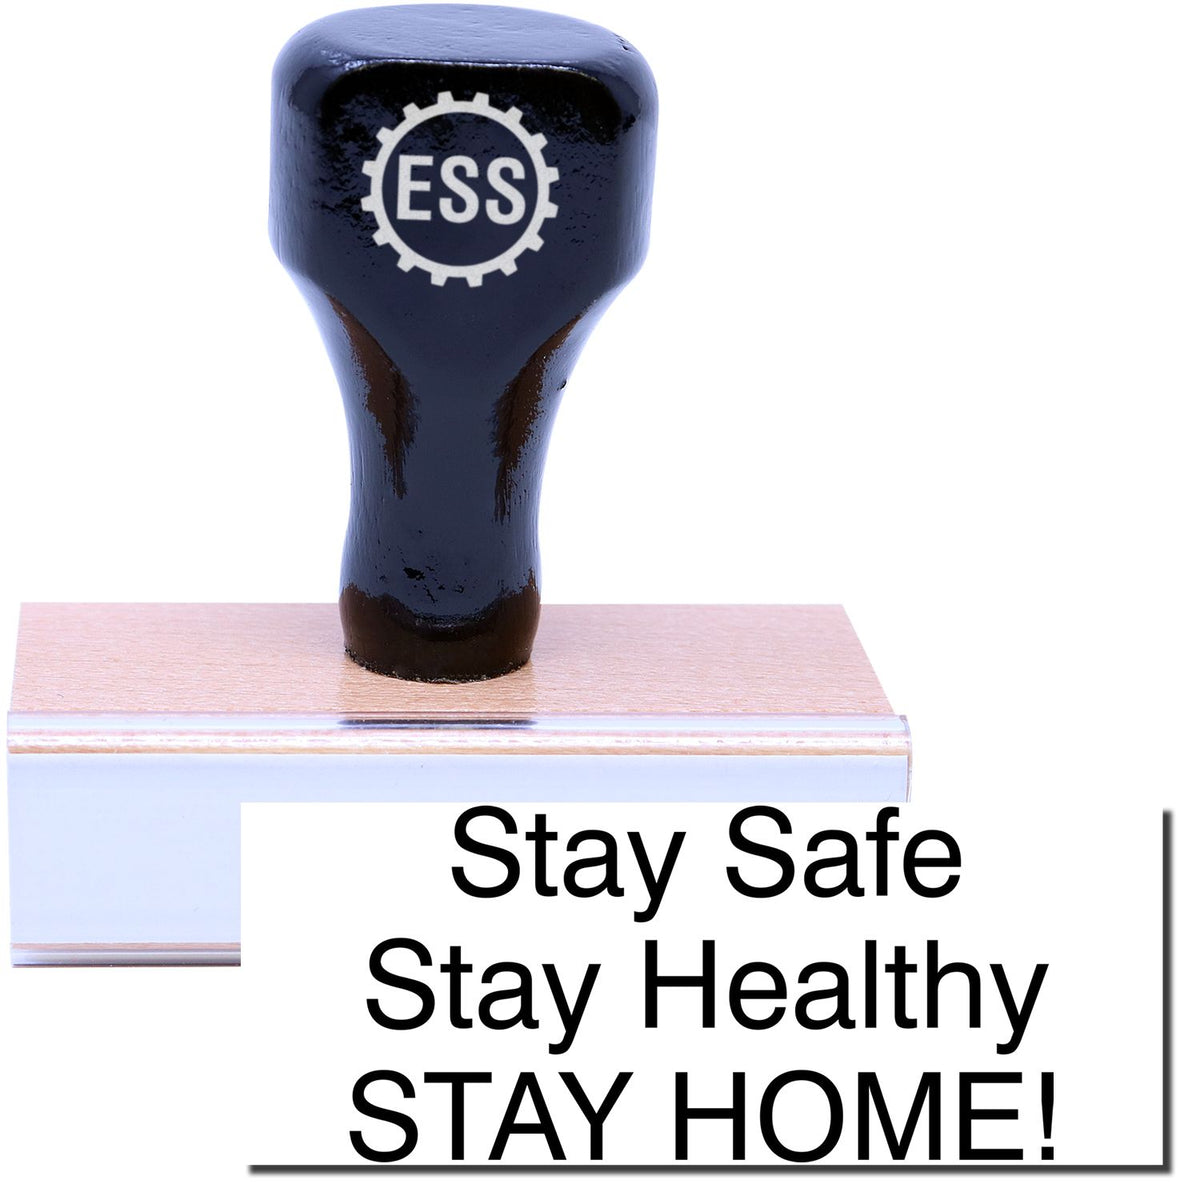 A stock office rubber stamp with a stamped image showing how the text &quot;Stay Safe Stay Healthy STAY HOME!&quot; in a large font is displayed after stamping.